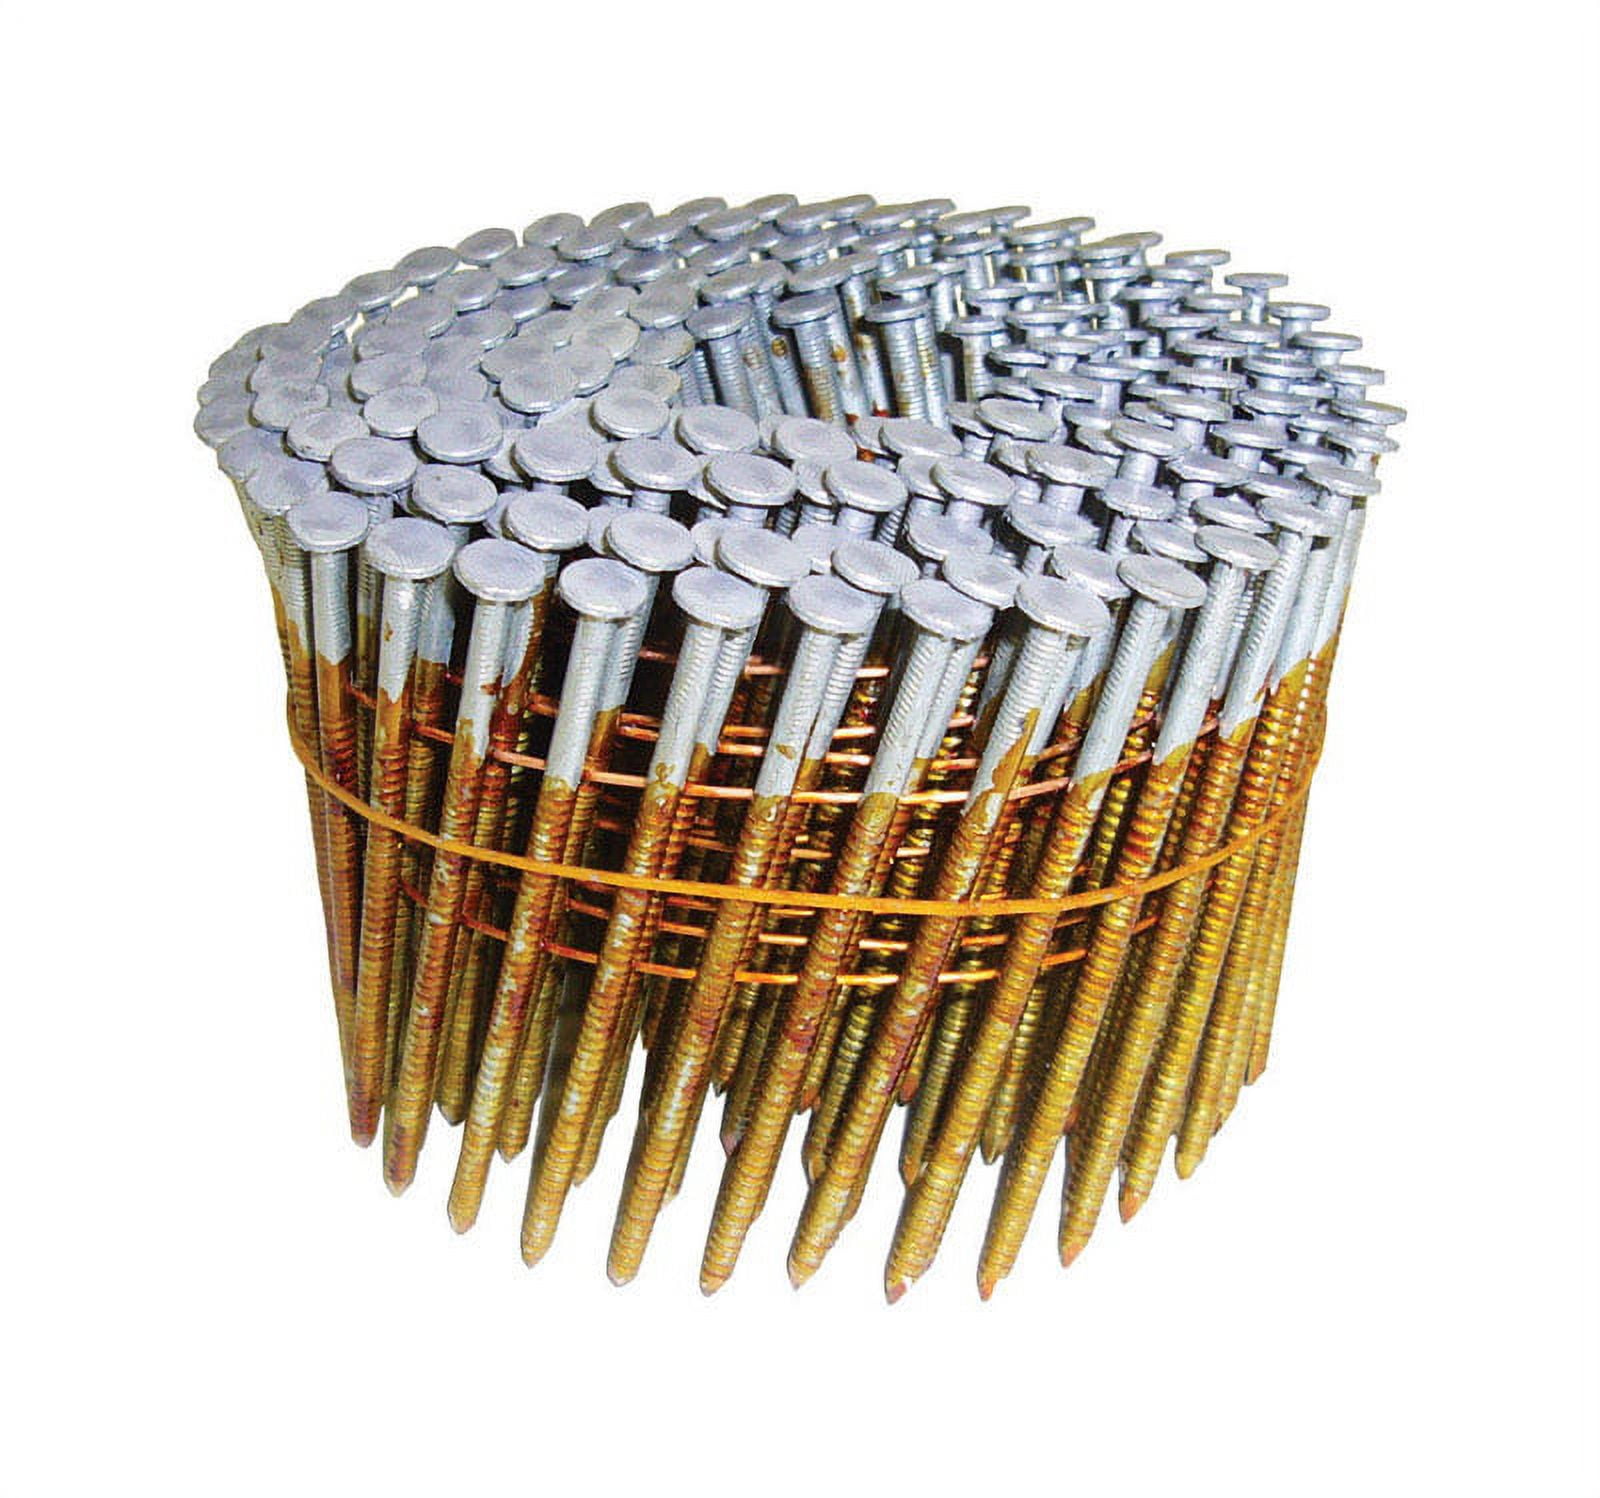 2799765 3 X 0.12 In. Dia. 16 Deg 16 Gauge Smooth Shank Angled Coil Framing Nails, Pack Of 4000